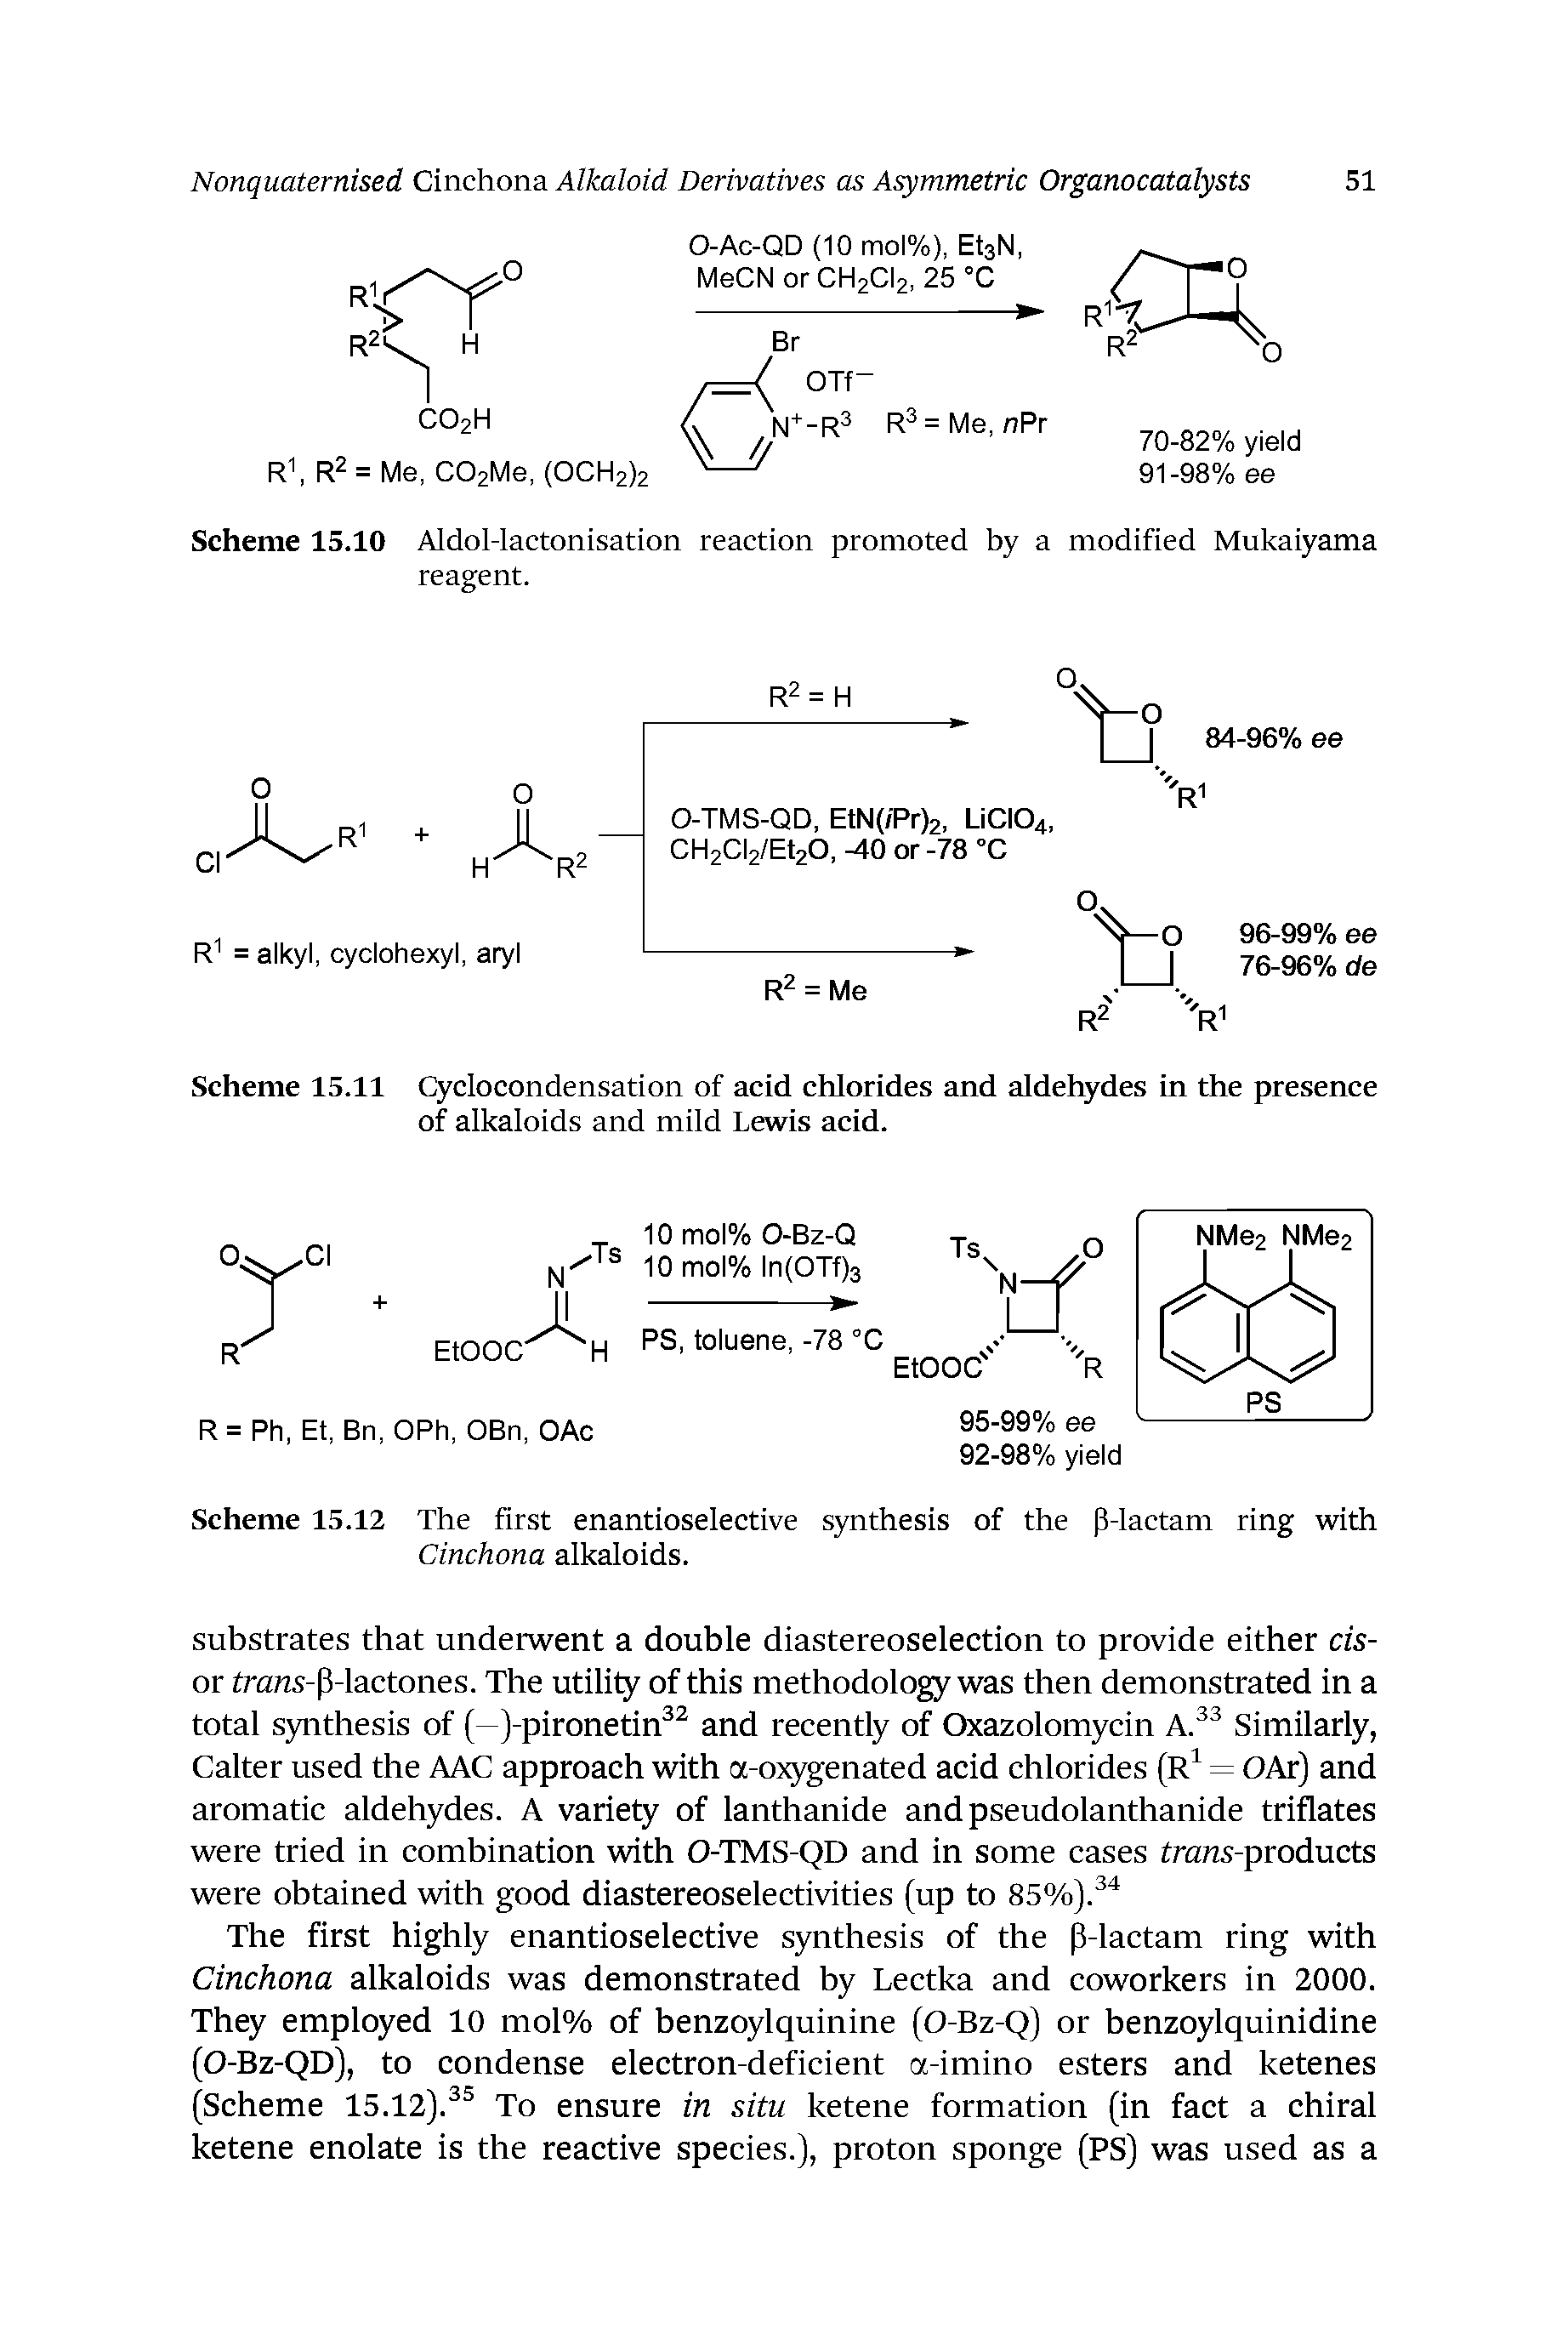 Scheme 15.12 The first enantioselective synthesis of the p-lactam ring with Cinchona alkaloids.